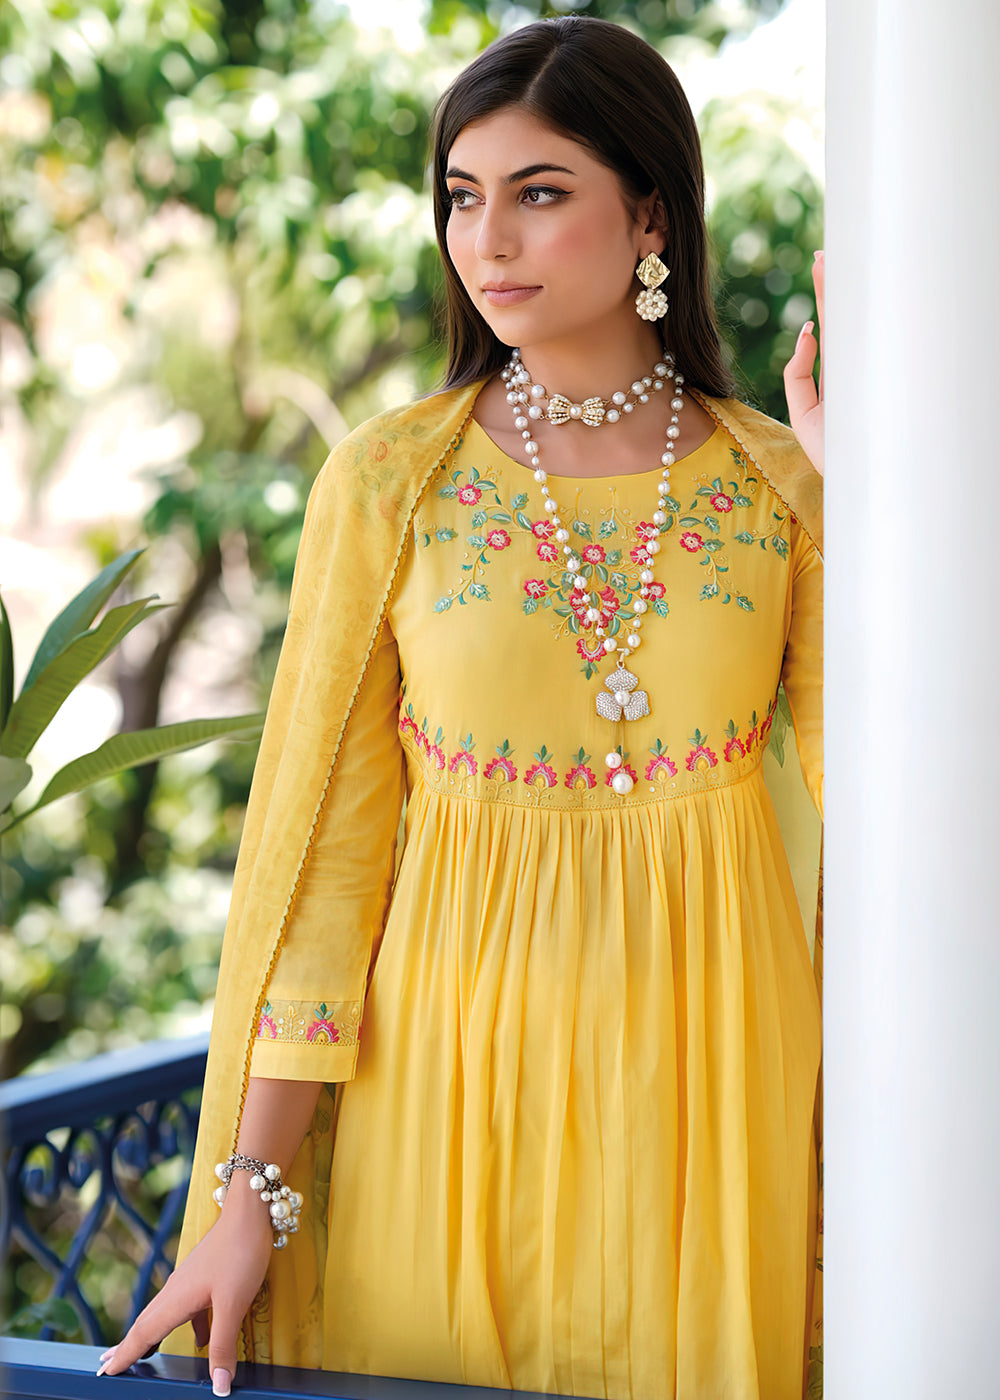 Buy Now Graceful Yellow Mal Mal Cotton Salwar Suit Online in USA, UK, Canada, Germany, Australia & Worldwide at Empress Clothing.